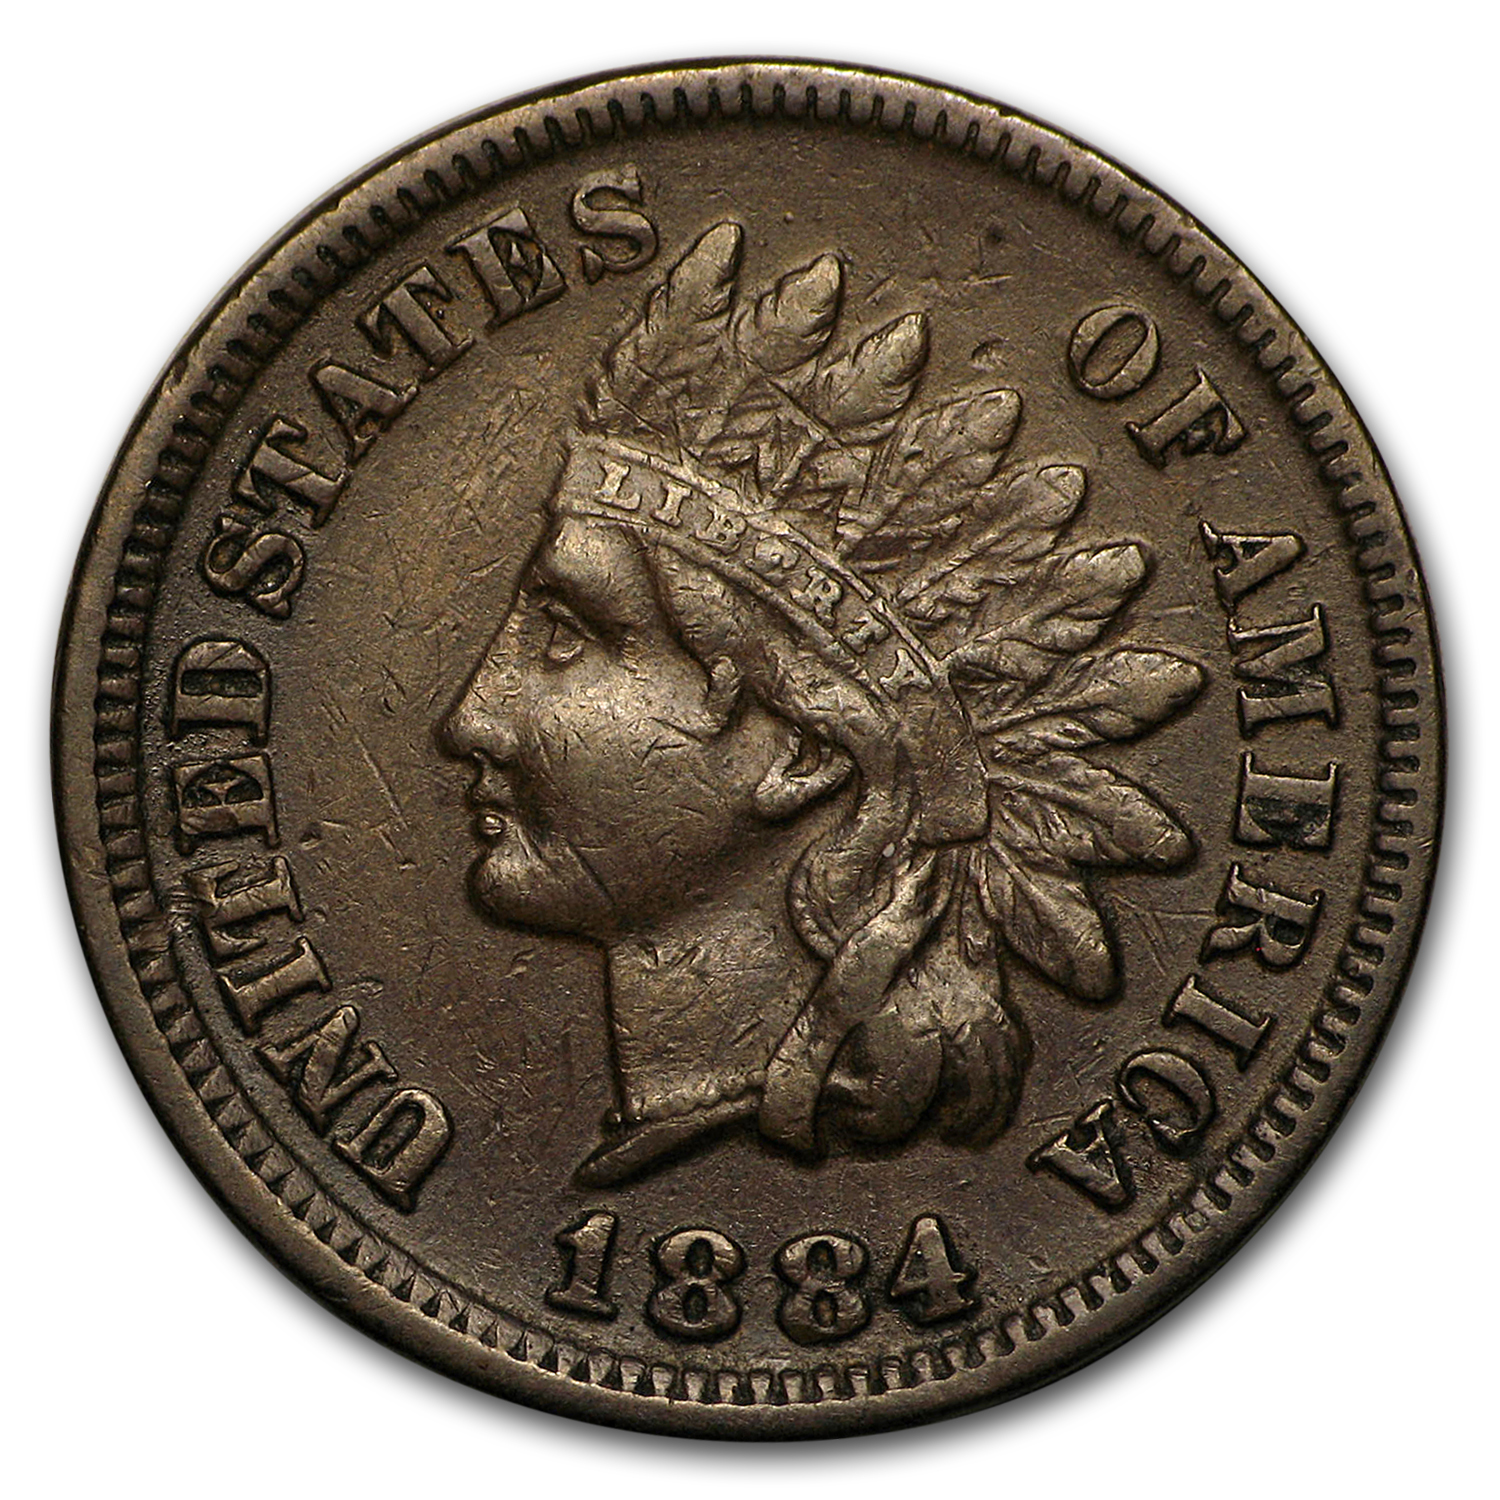 Buy 1884 Indian Head Cent XF